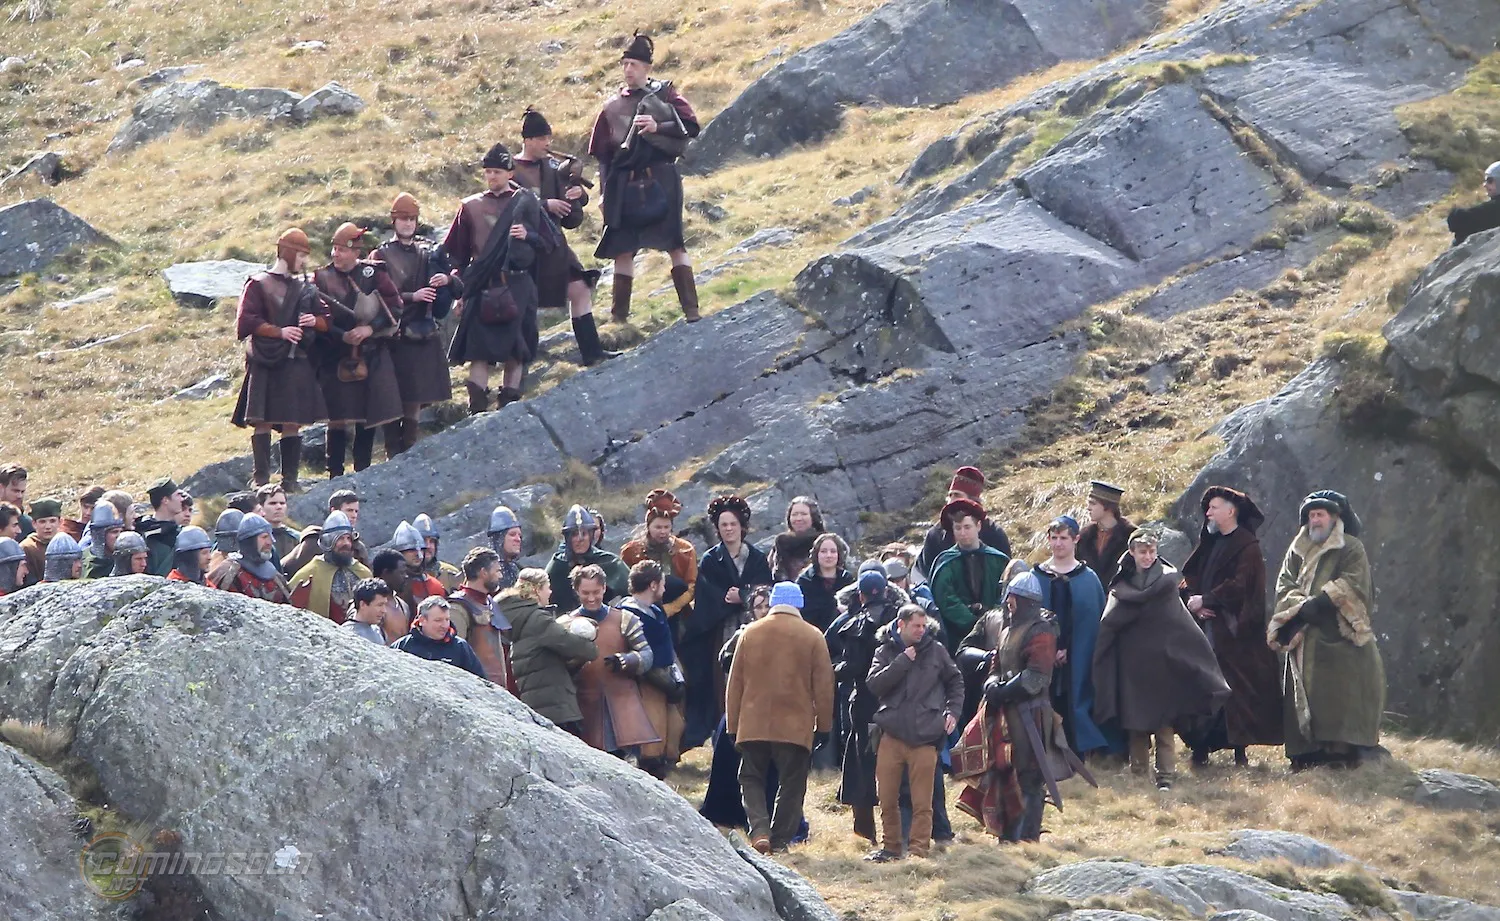 'Knights of the Roundtable: King Arthur' filming in Wales

Featuring: Guy Ritchie
Where: Conwy, United Kingdom
When: 14 Apr 2015
Credit: WENN.com